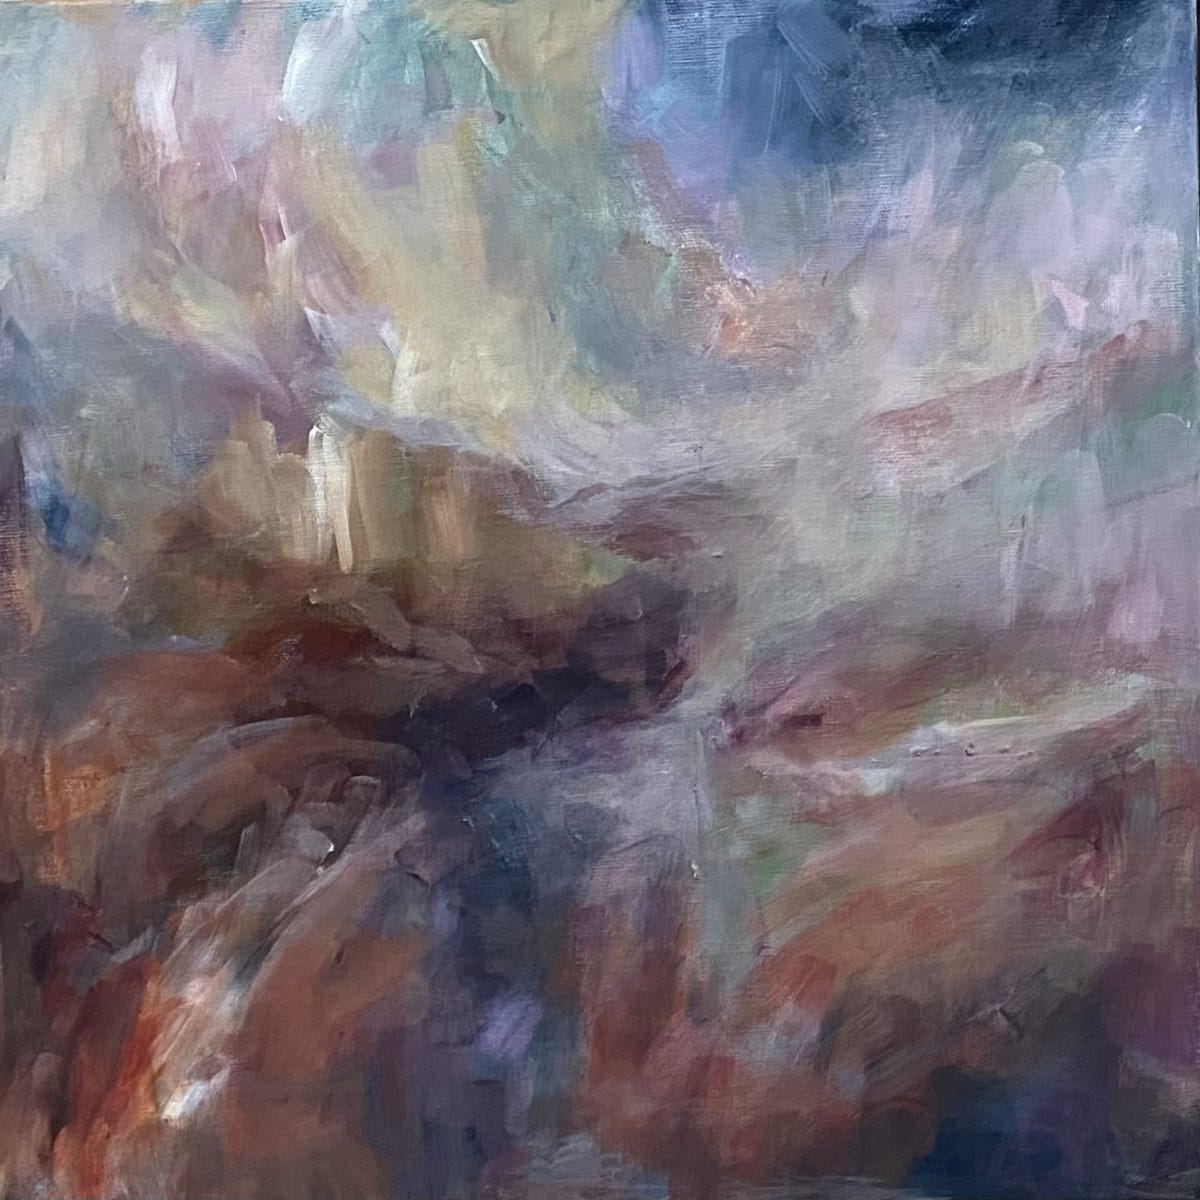 Watching: weather coming in by Jo York  Image: Watching- standing on the moor watching the mood and atmosphere change, as the weather rolls in.
Made in many layer of opaque and translucent acrylic on deep canvas.